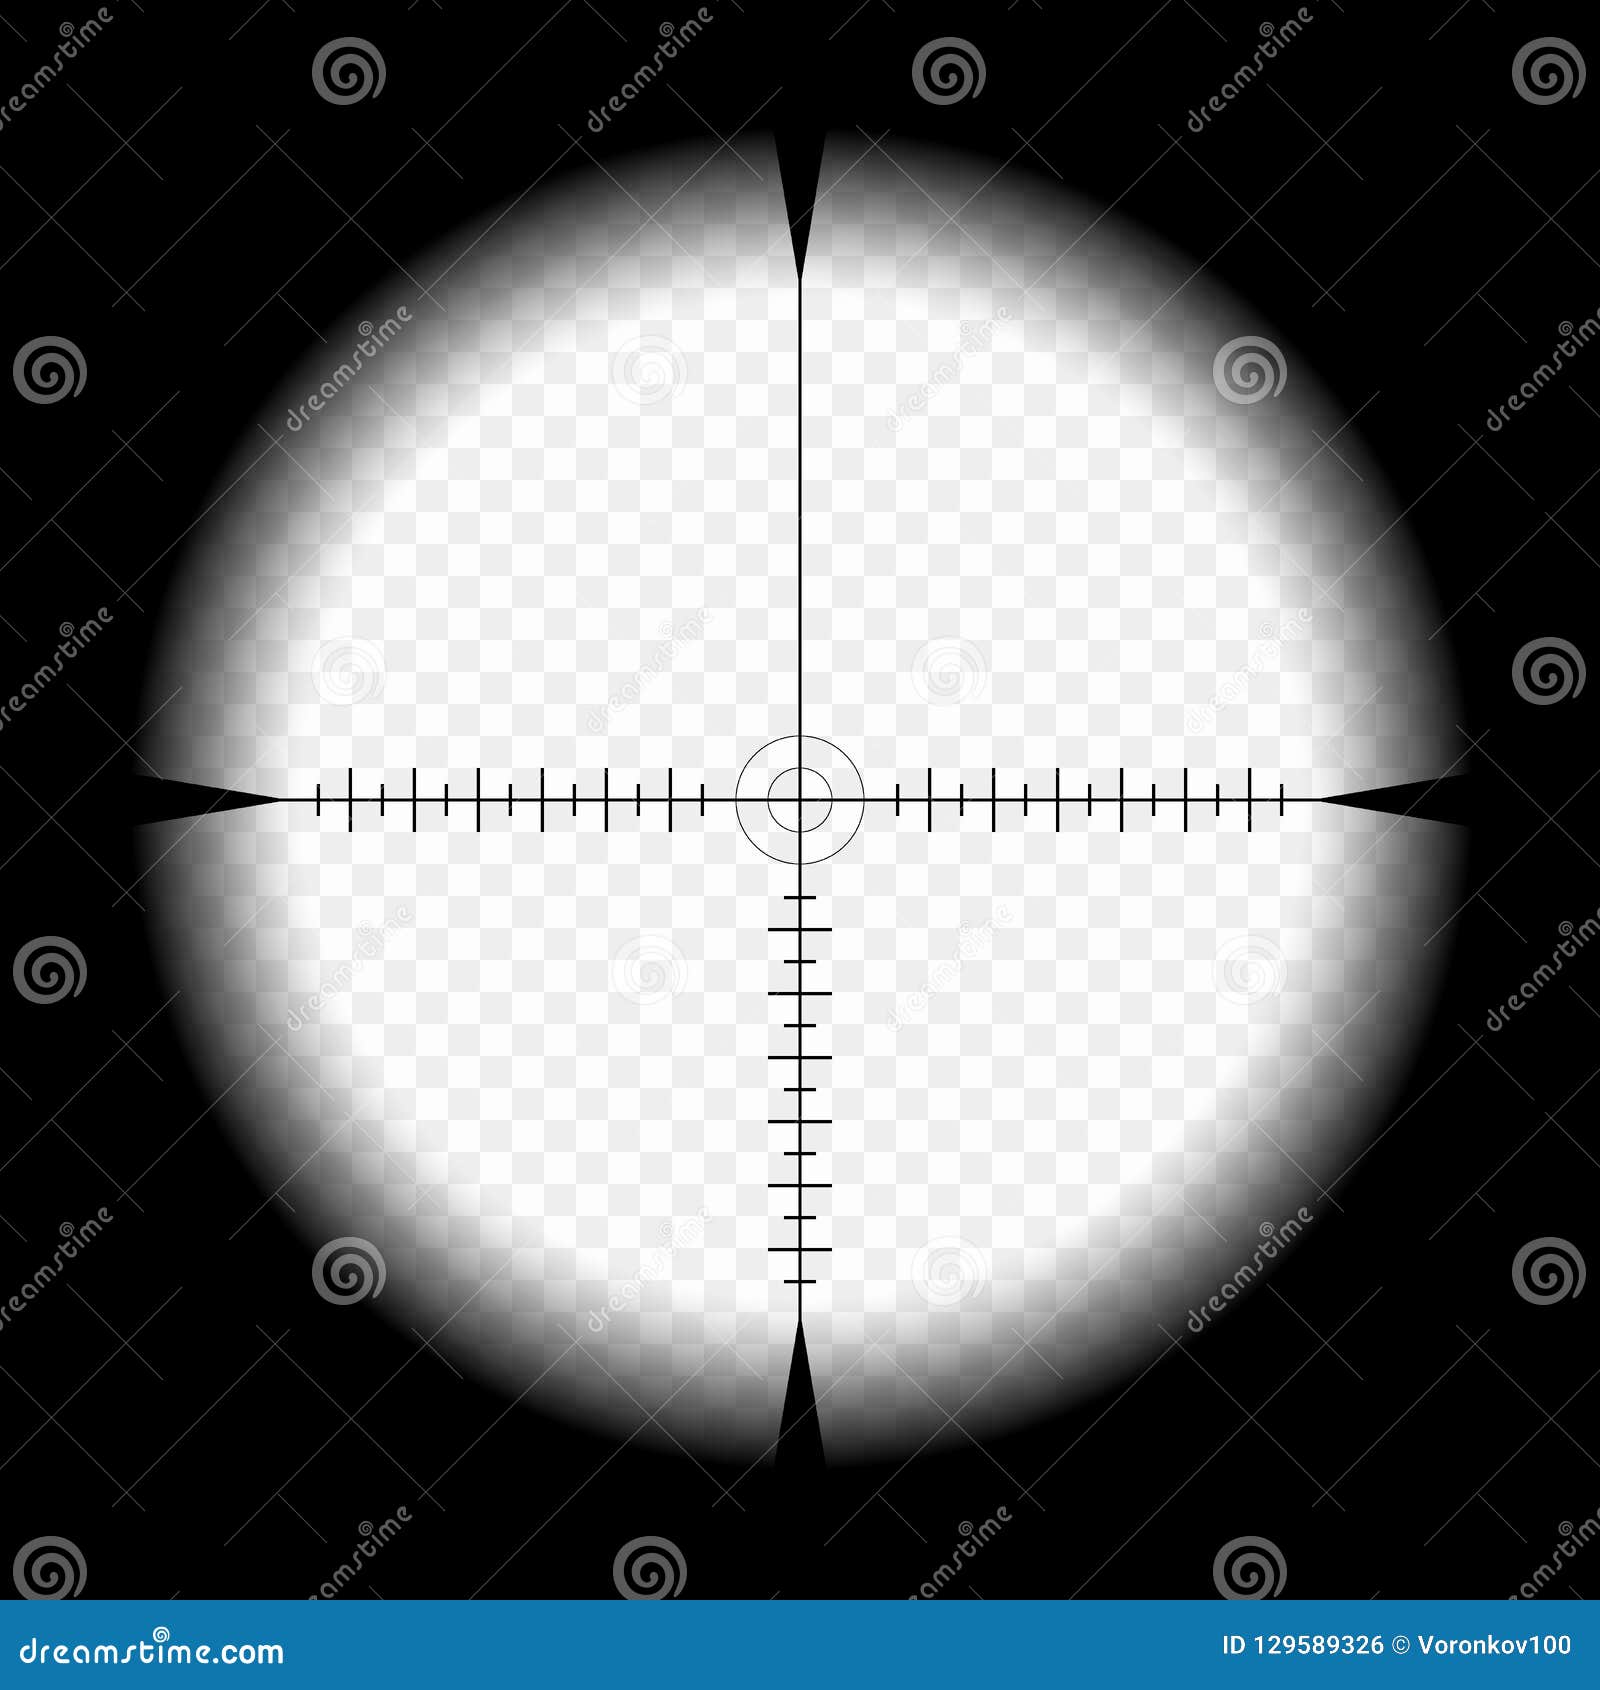 sniper scope template, with measurement marks on  background. view through the sight of a hunting rifle.